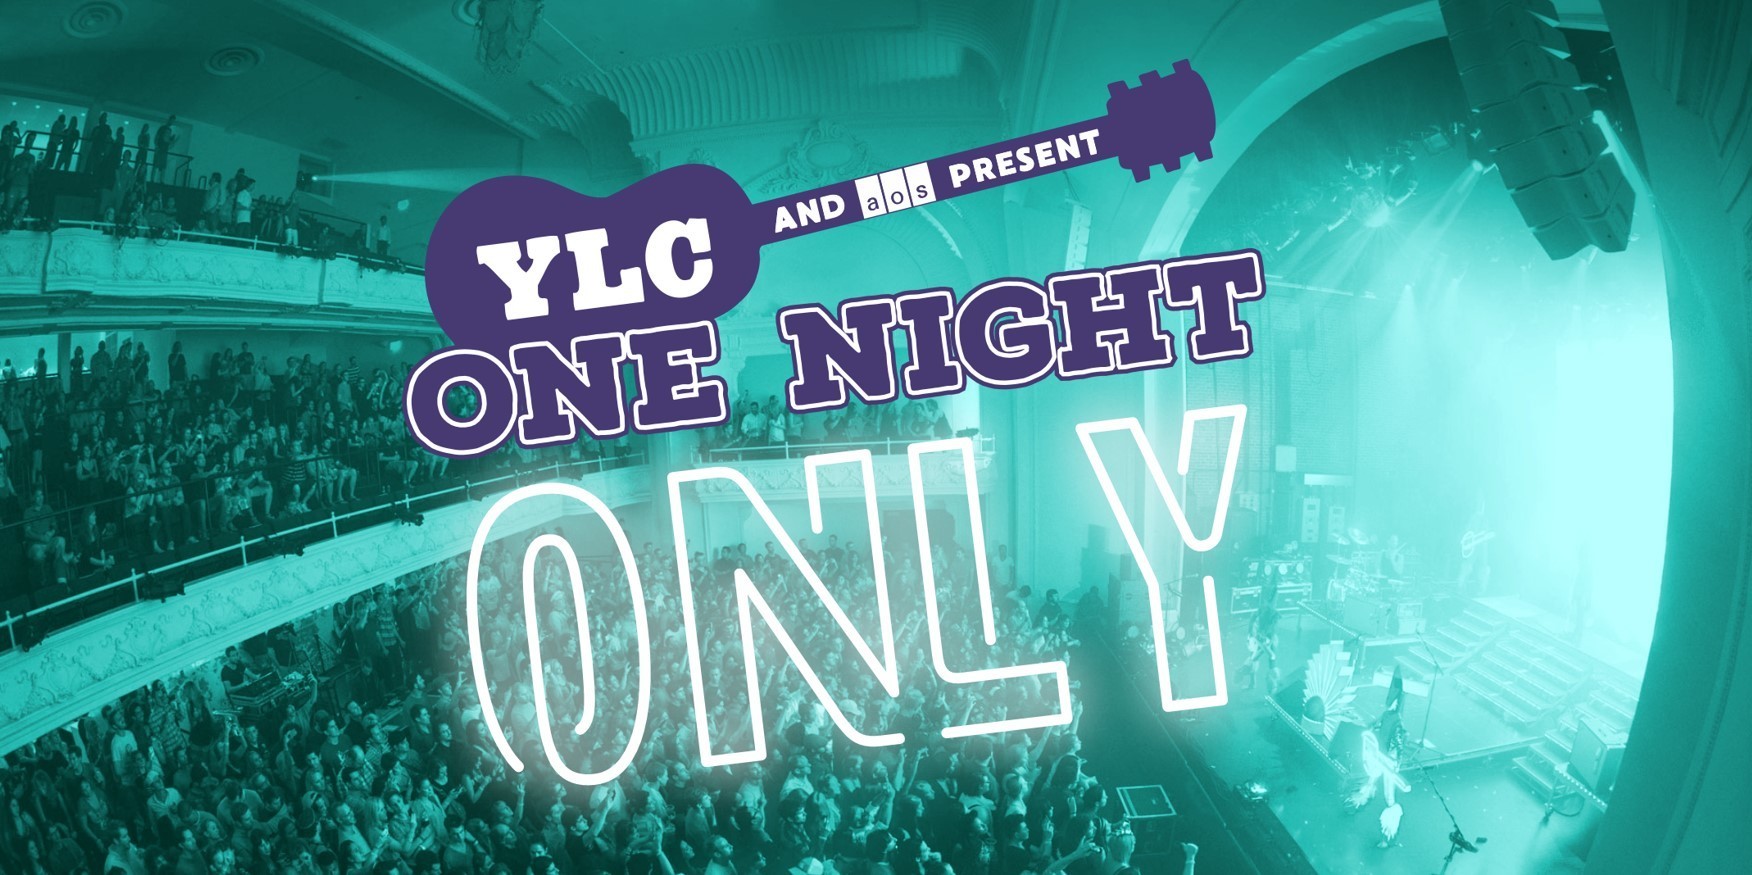 YLC Wednesday at the Square One Night Only Benefit Concert, New Orleans, Louisiana, United States